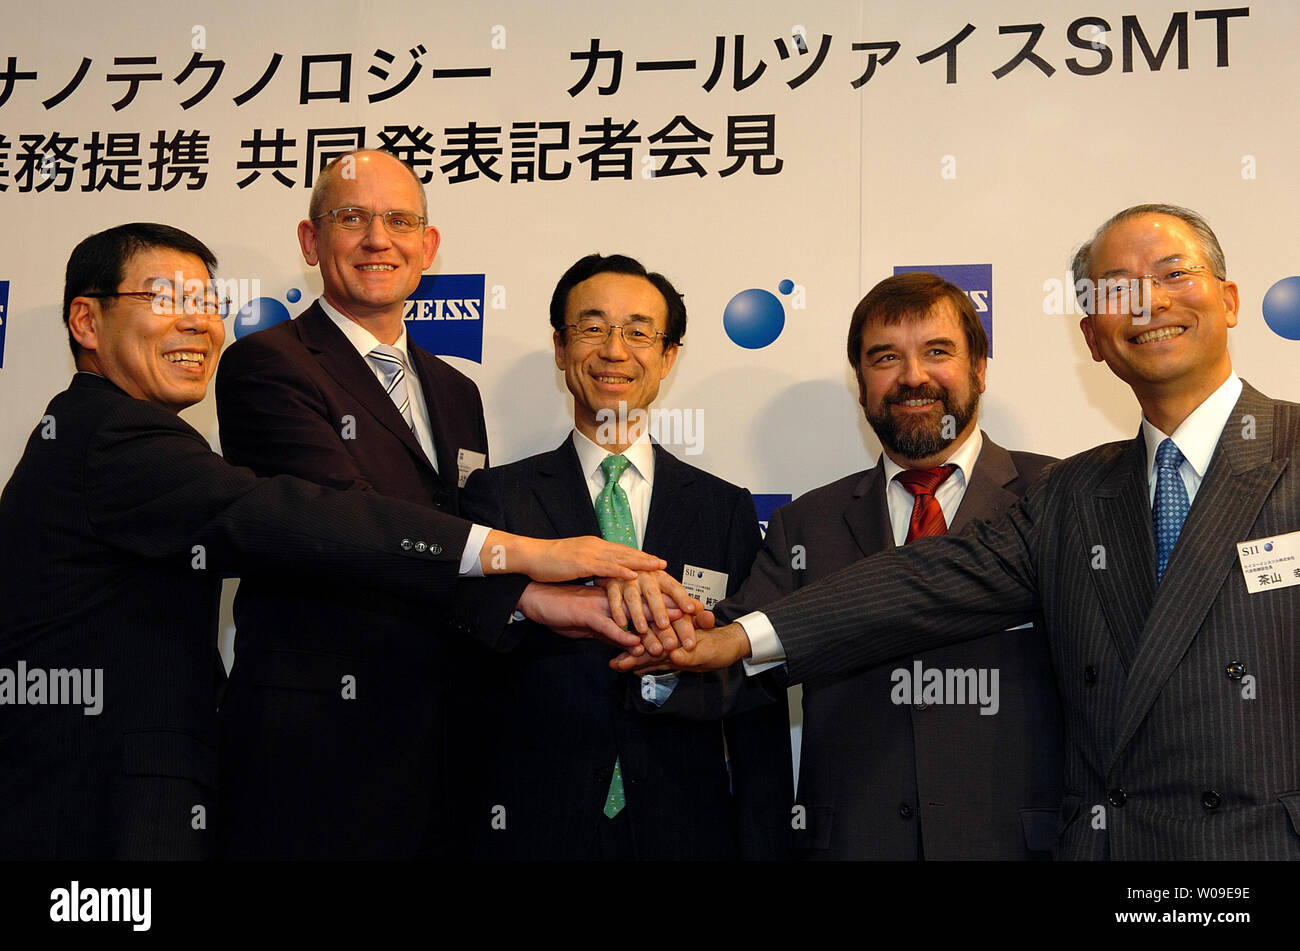 Dirk Stenkamp, head of Carl Zeiss NTS clasps hands during a press  conference in Tokyo, Japan, on Mar. 16, 2006. He is in Japan to announce  his company's global collaboration with Seiko